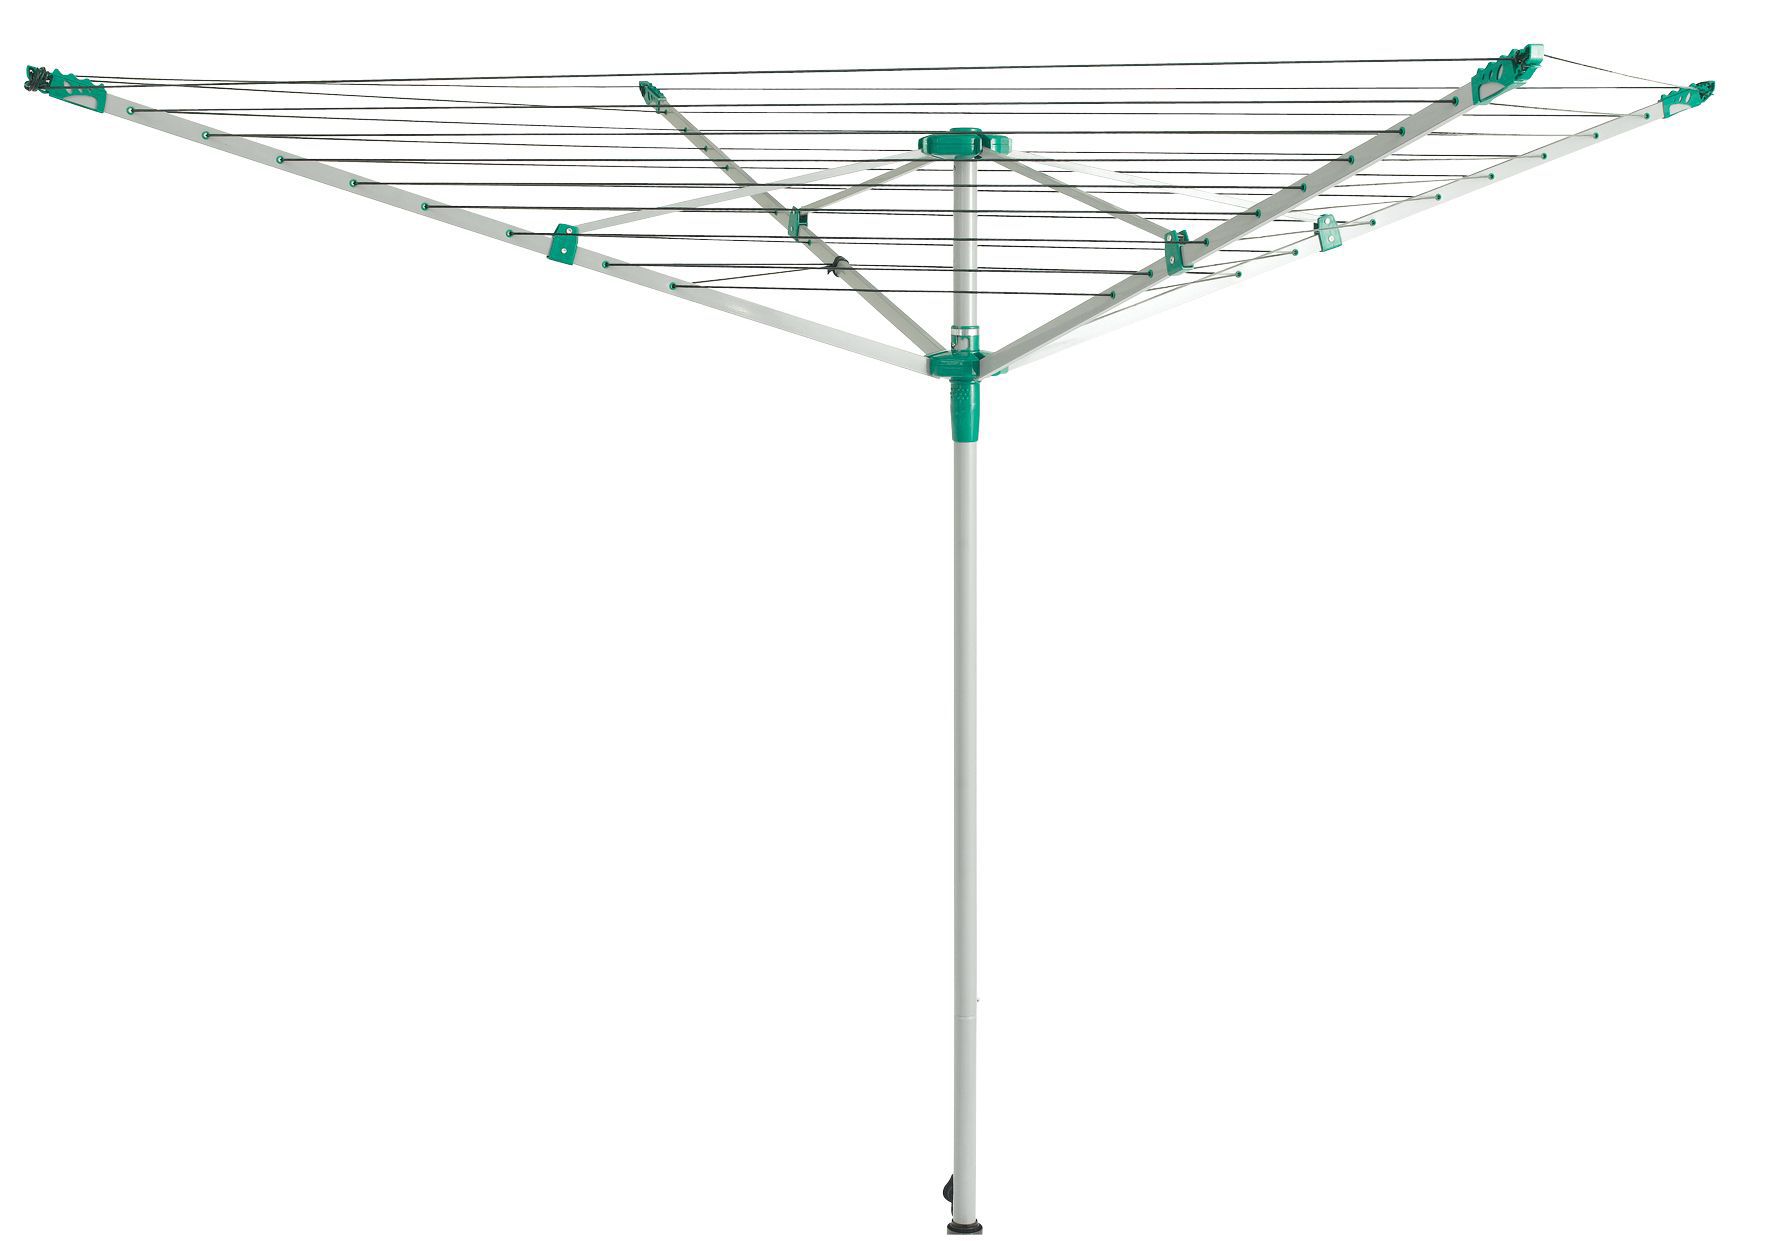 Silver effectBluePlastic & steel 4 Arm Rotary airer, 45m